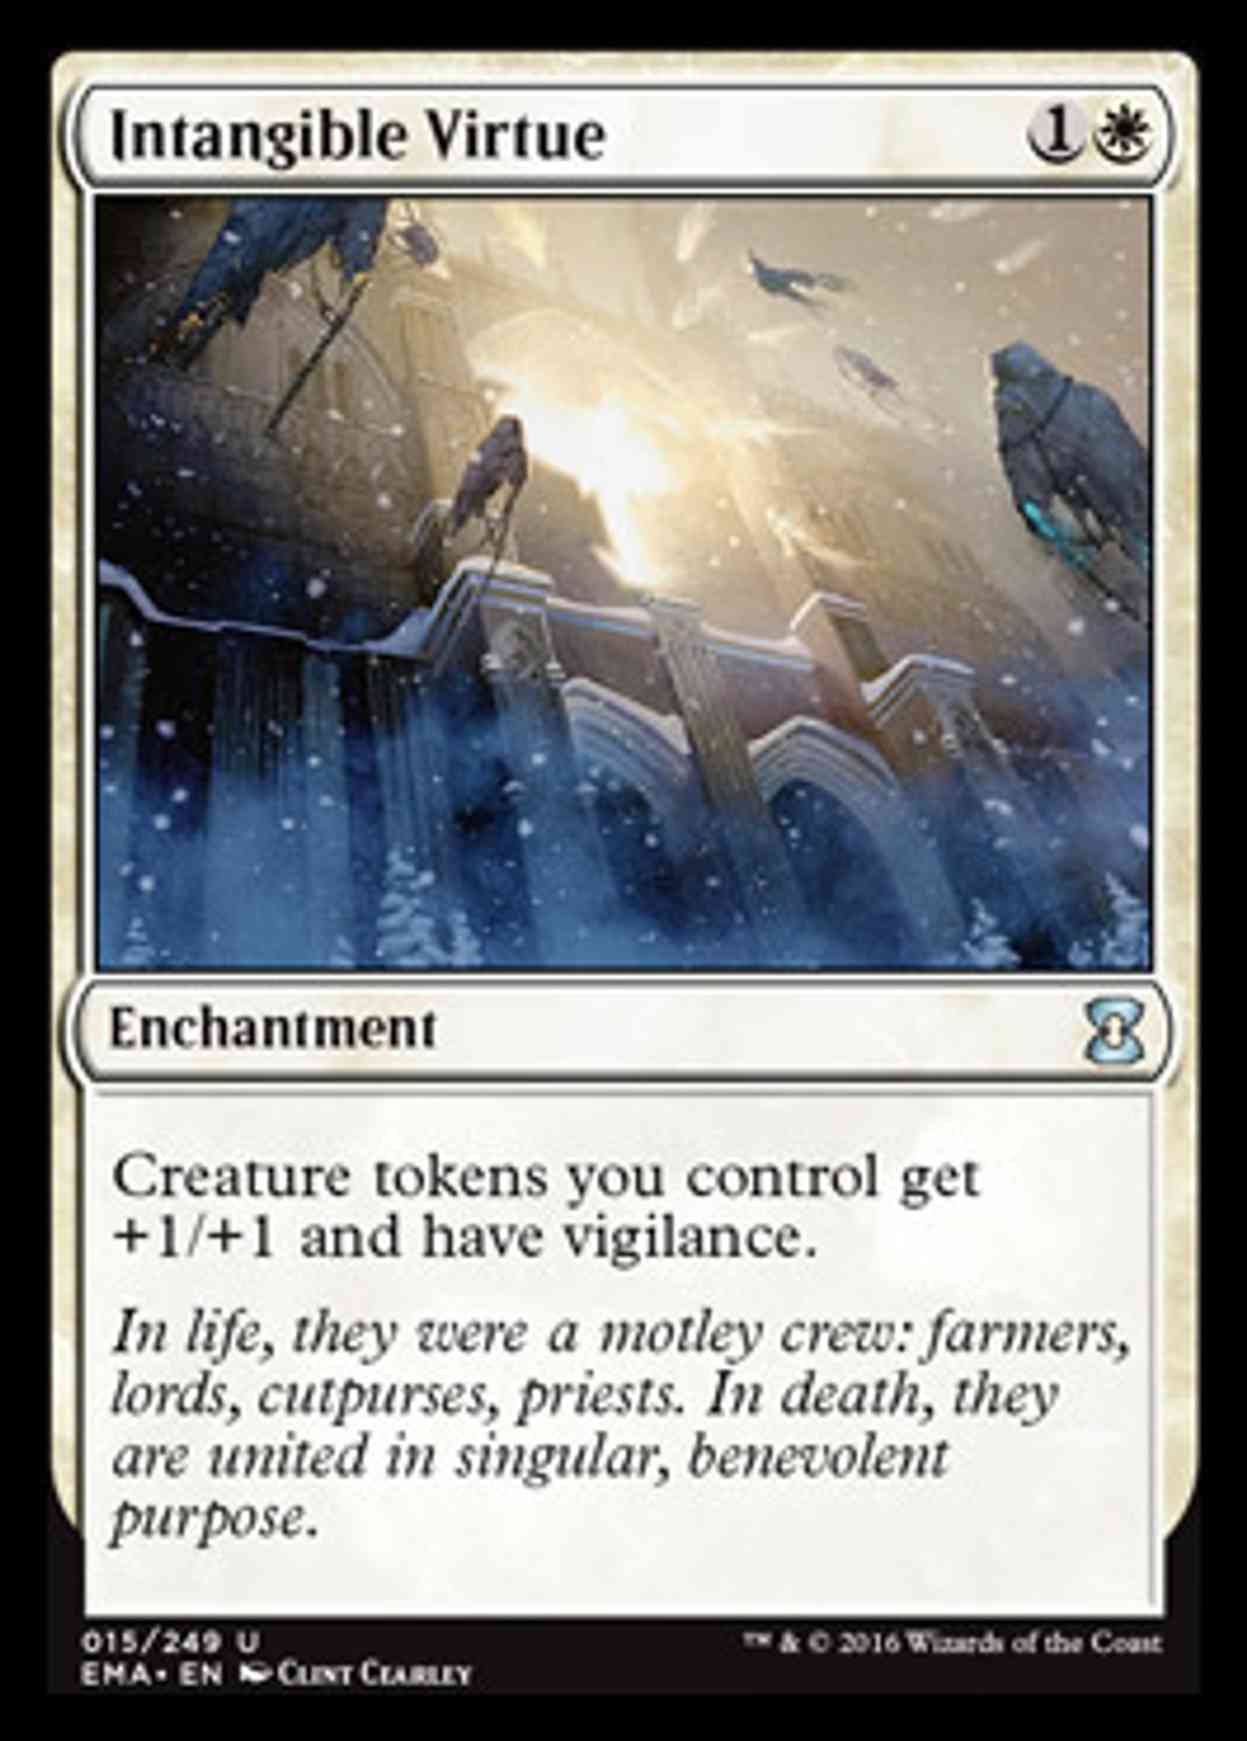 Intangible Virtue magic card front